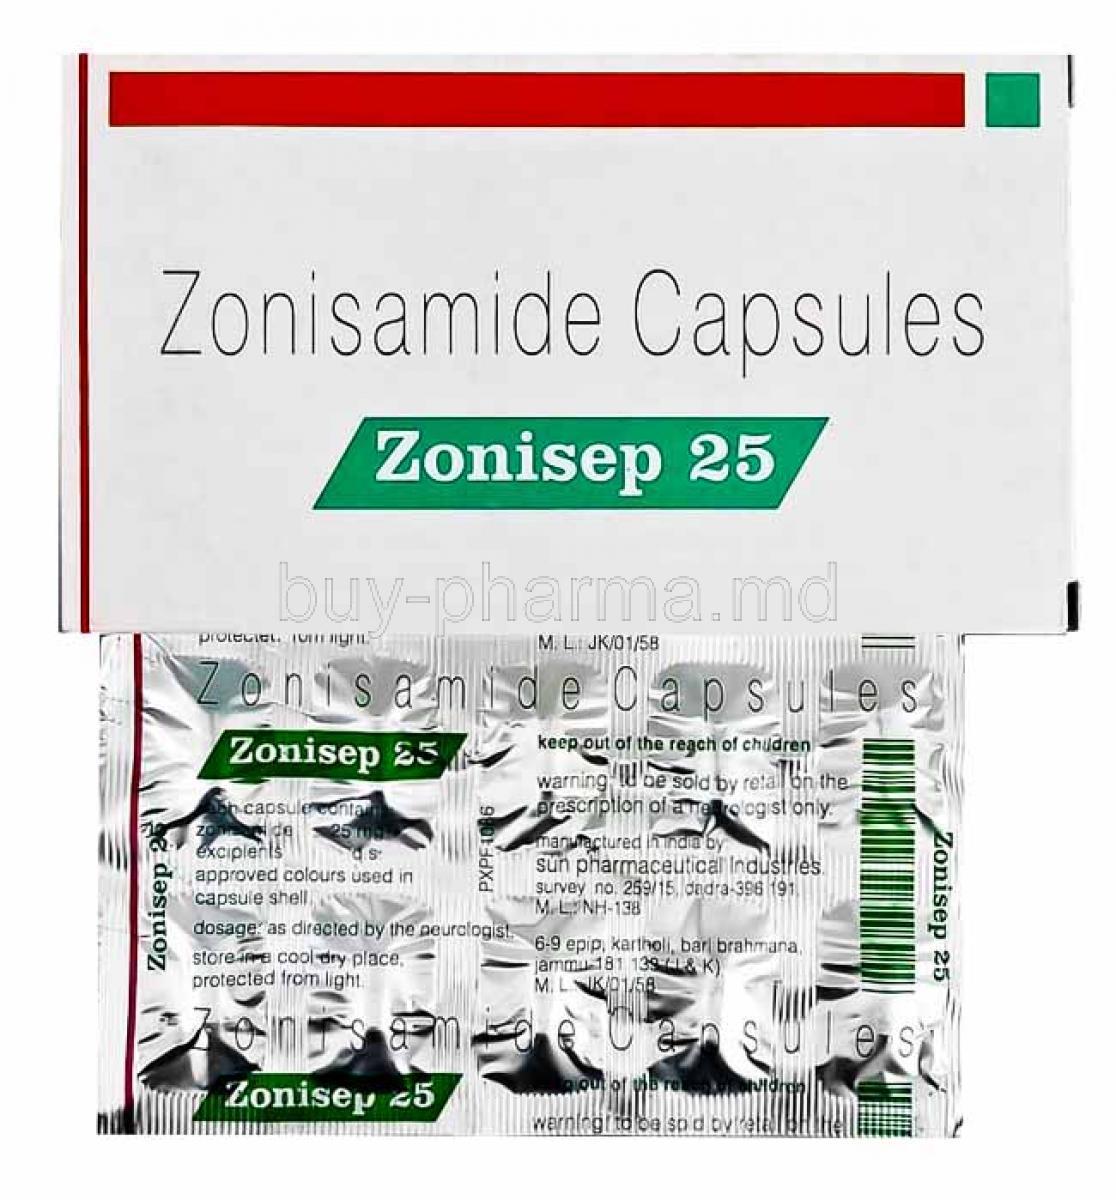 Aonisep, Zonisamide 25mg box and capsules